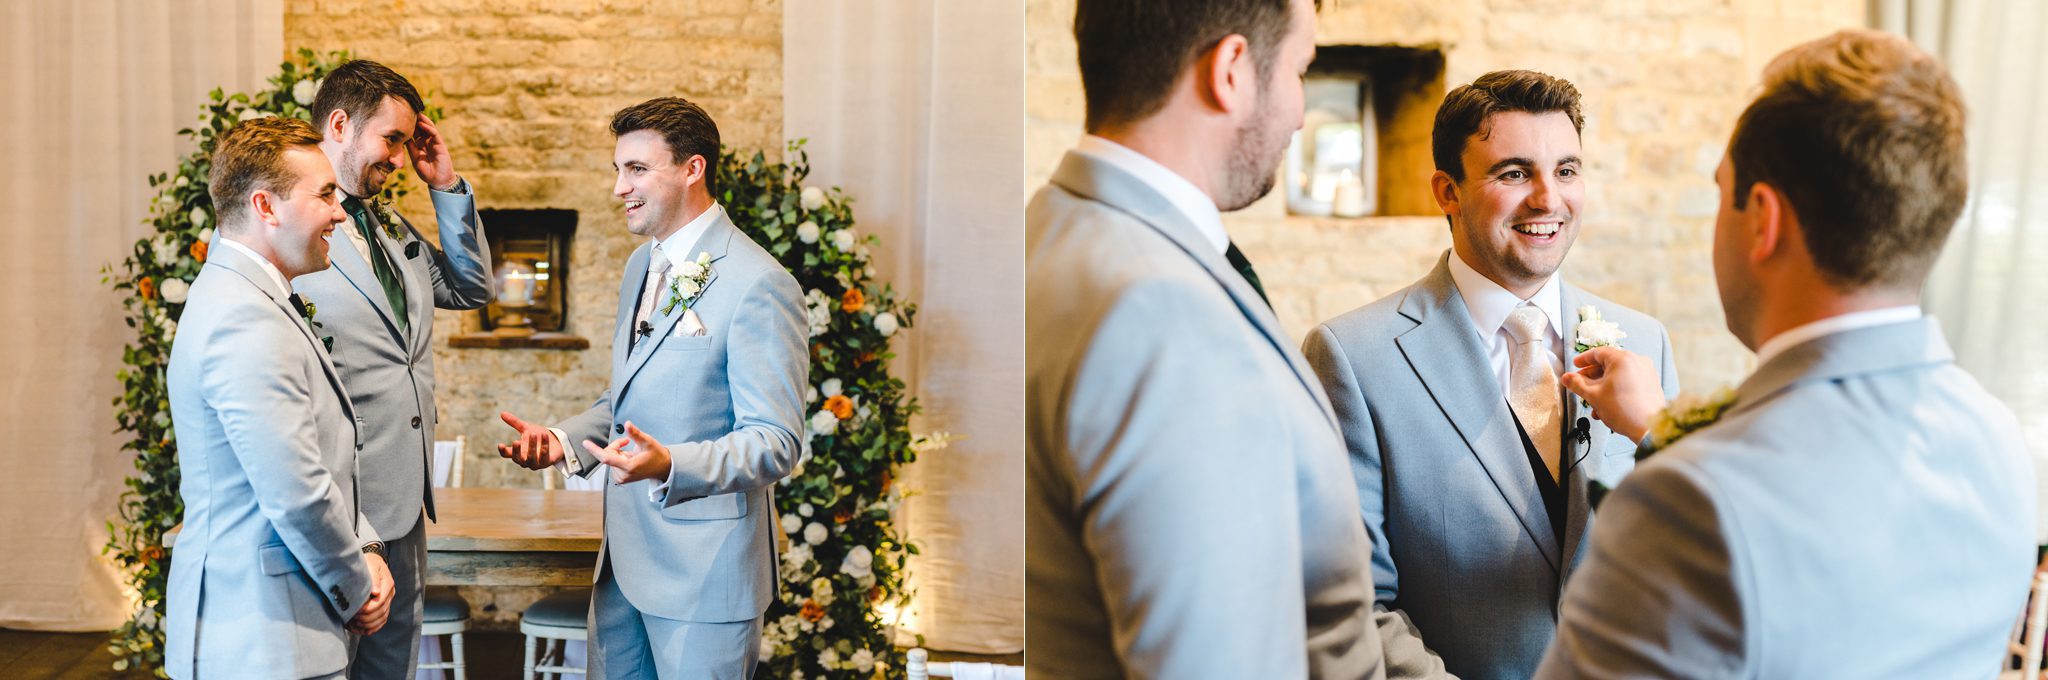 a nervous groom ahead of his ceremony